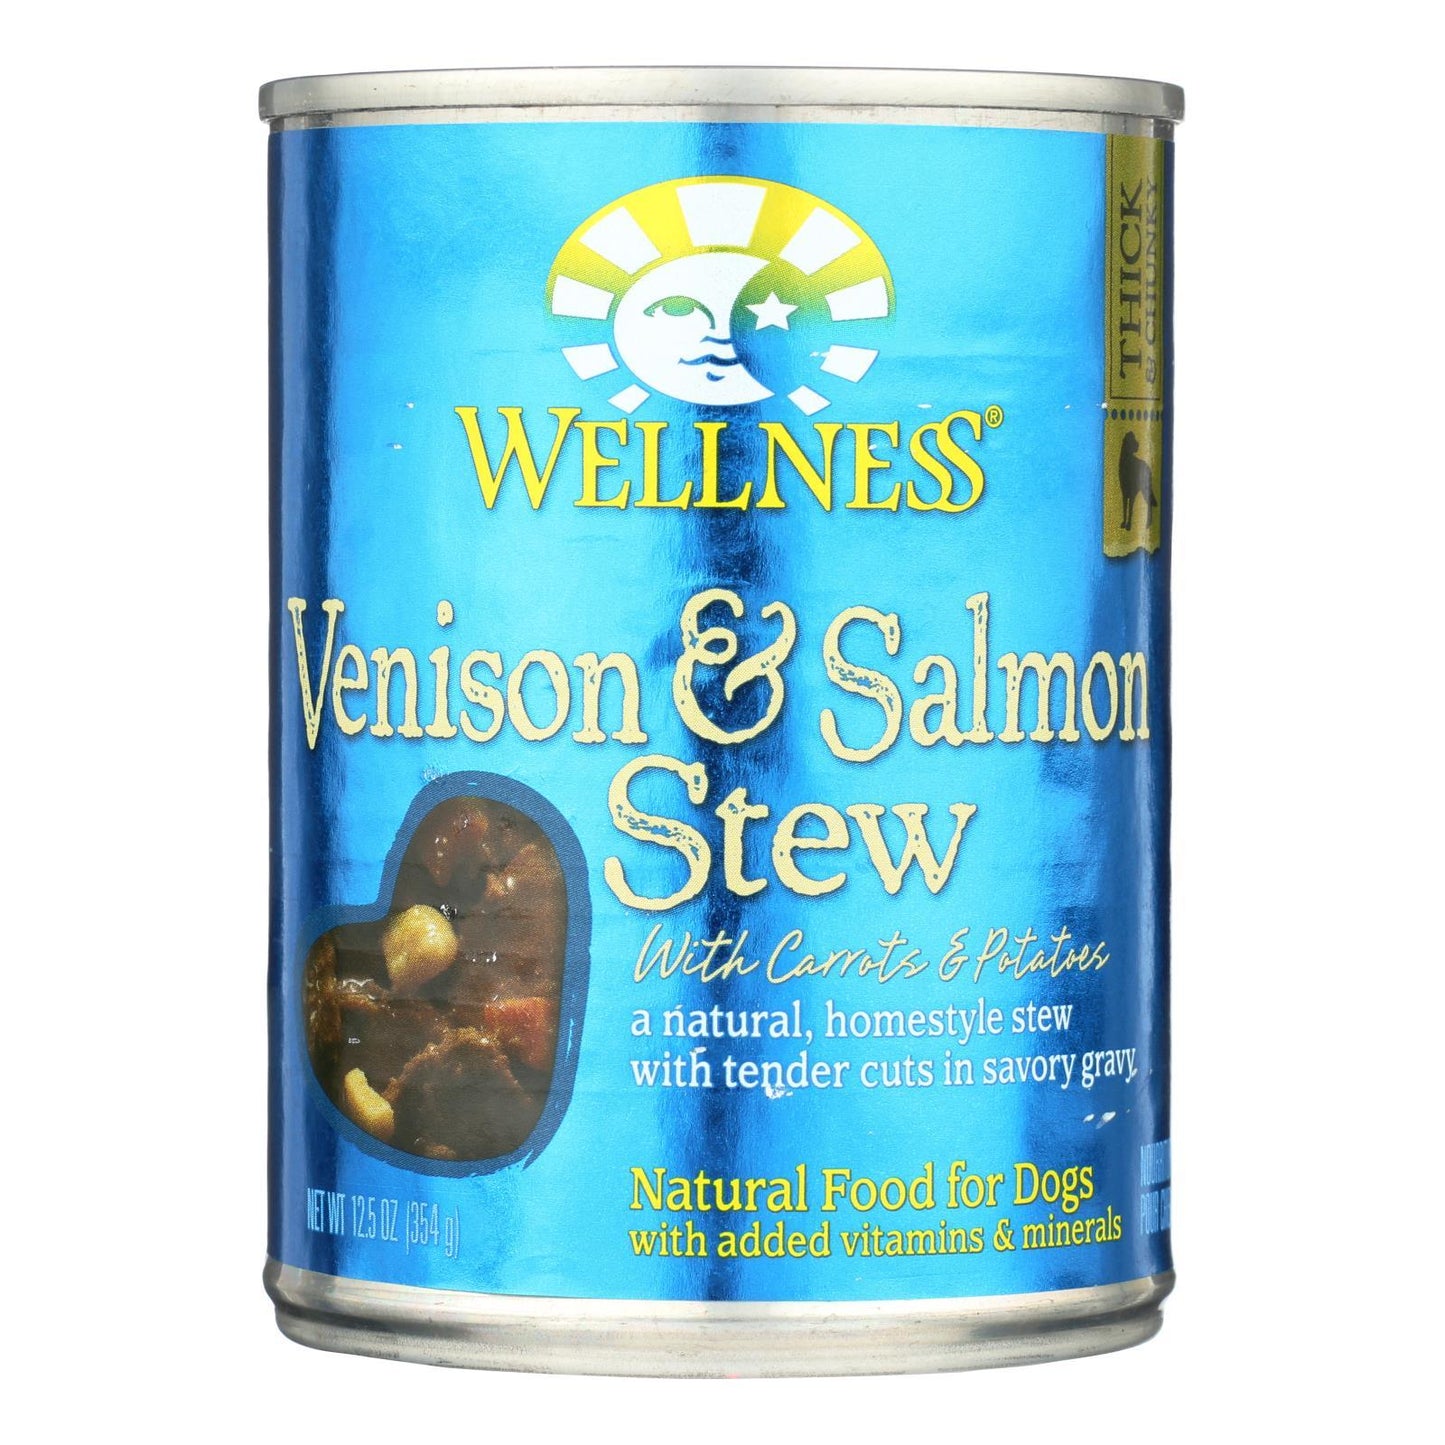 Wellness Wet Dog Food - Venison and Salmon with Potatoes & Carrots - Case of 12